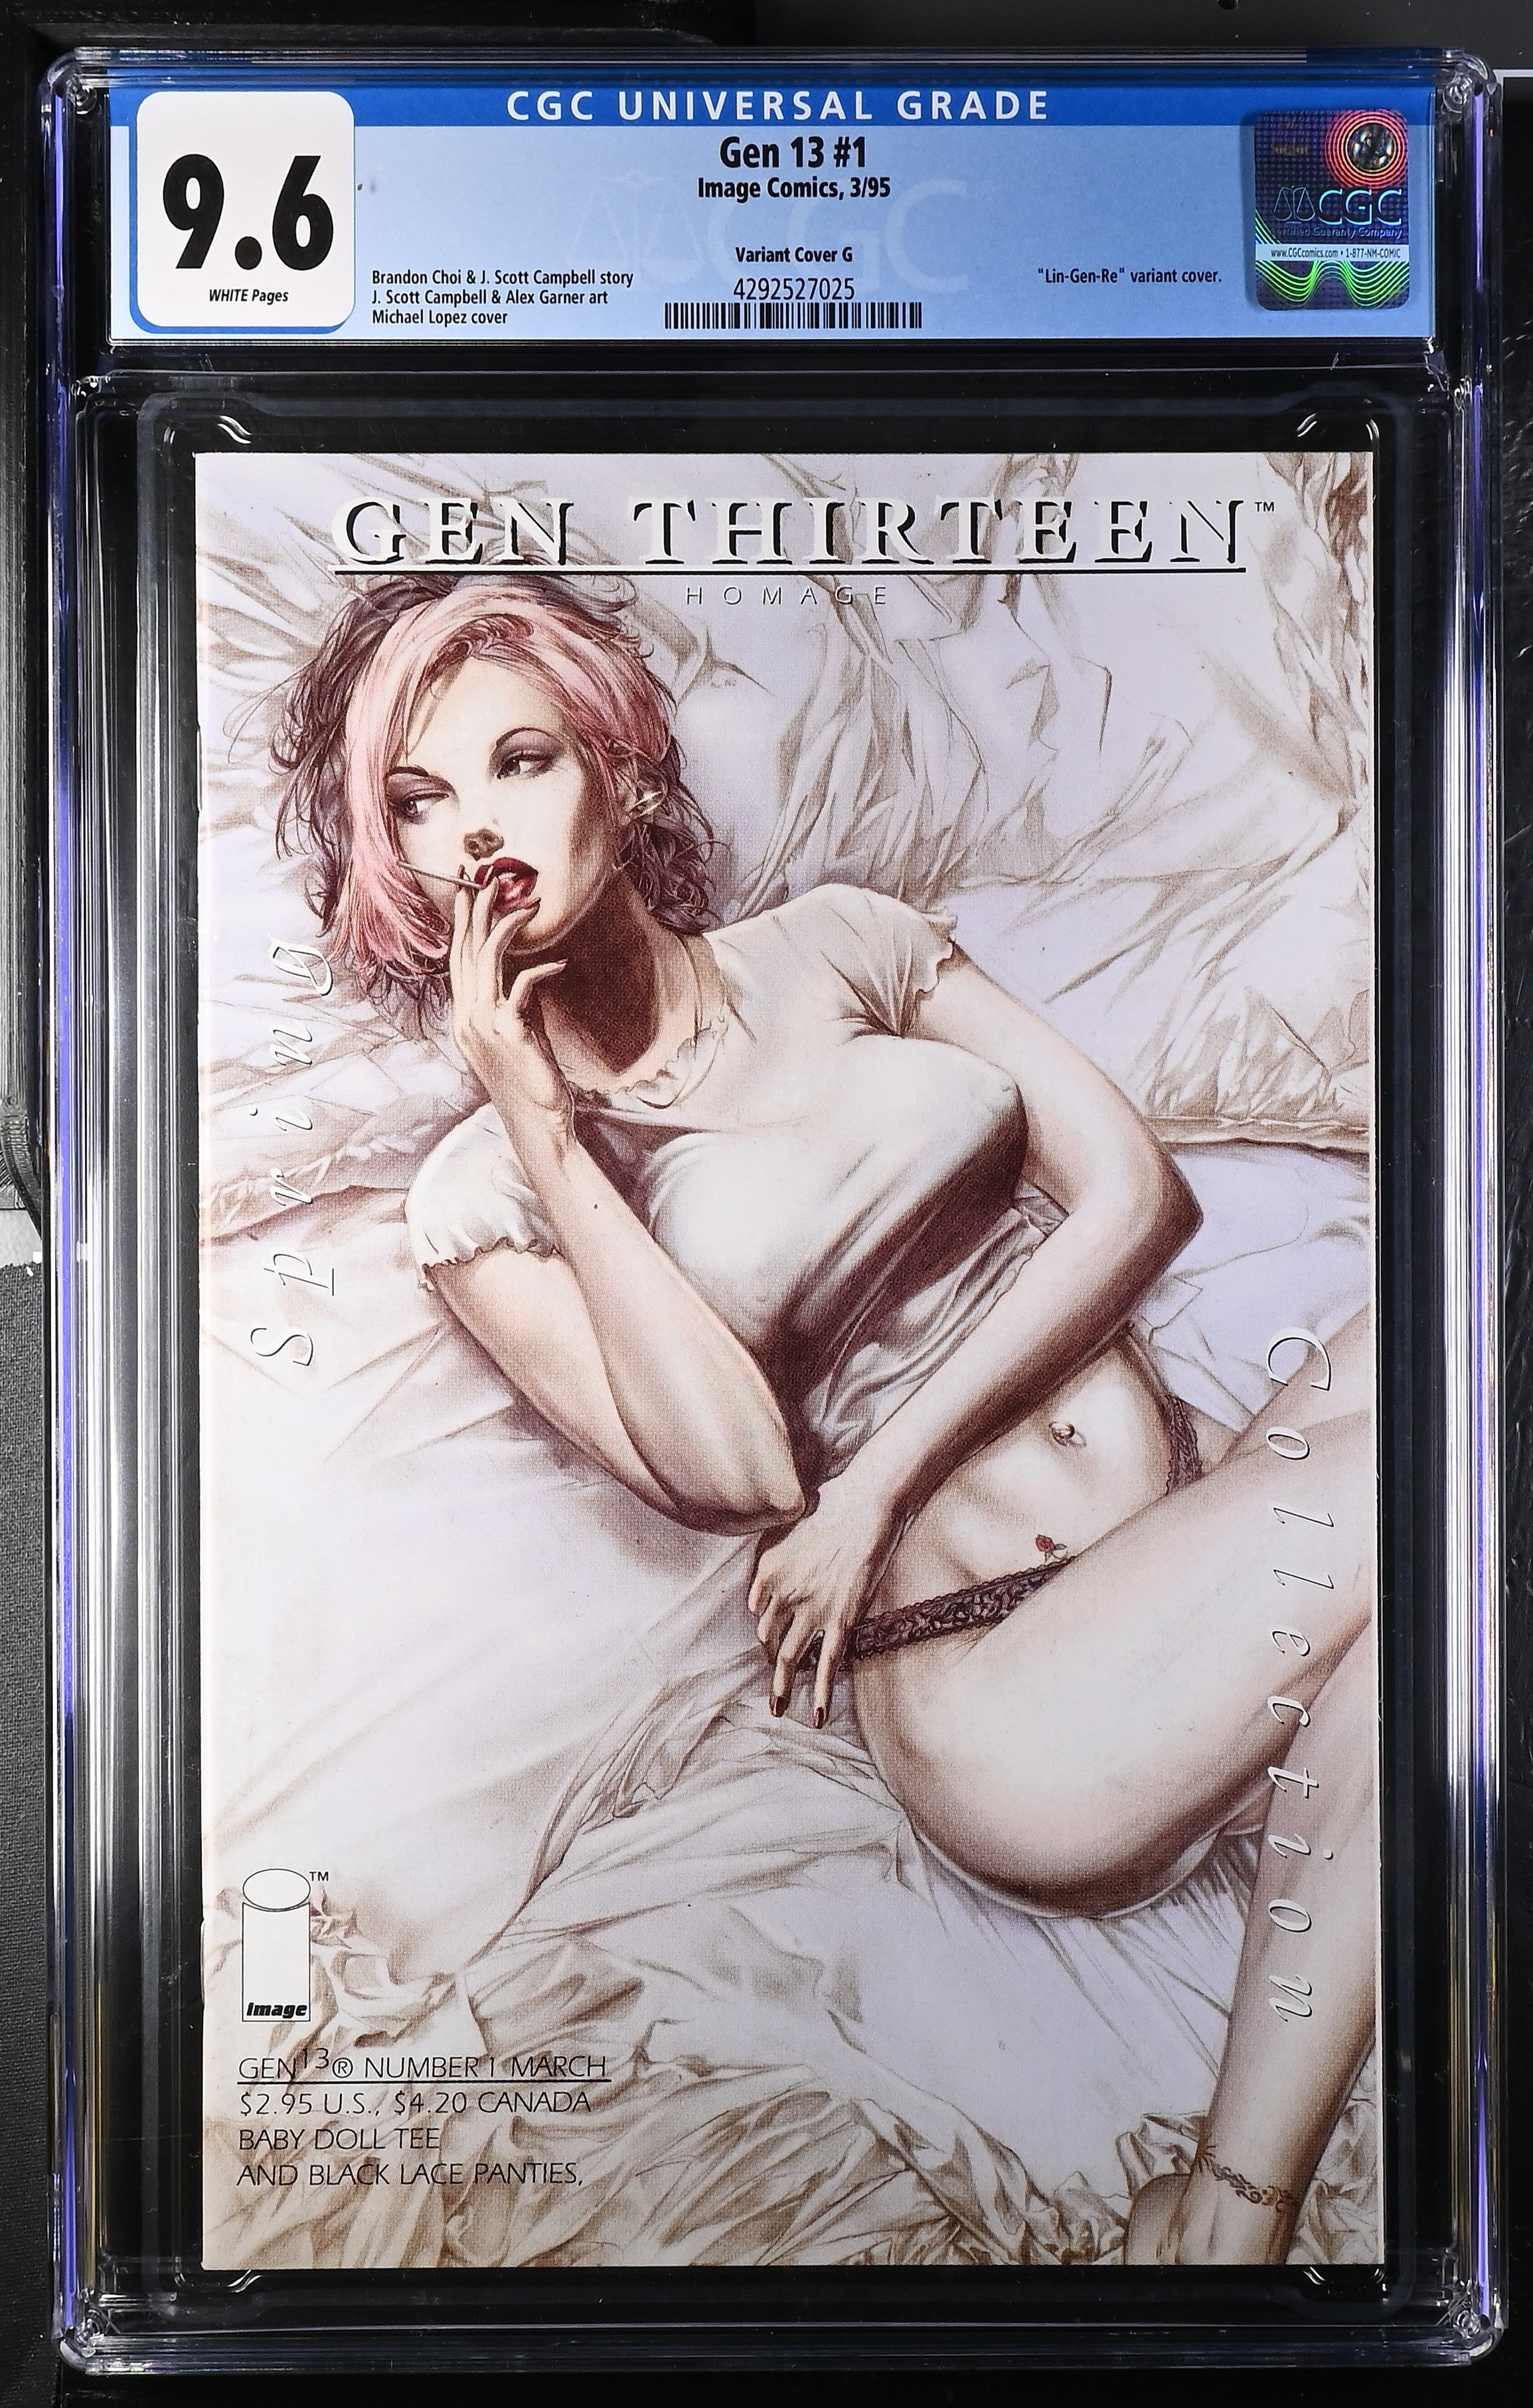 #Grade_cgc 9.6 variant cover g (4292527025)